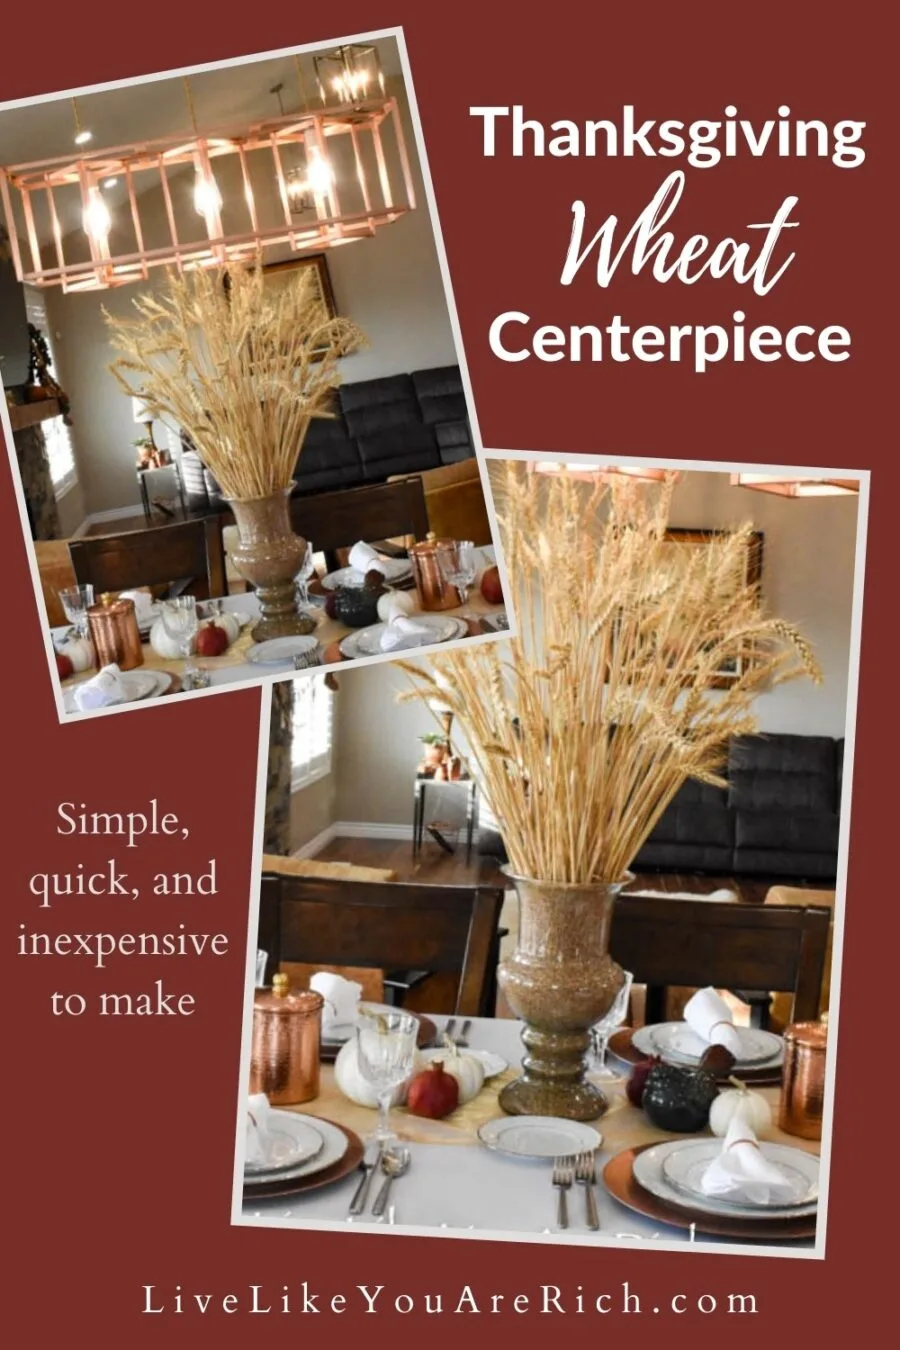 This is a very simple, quick, and inexpensive Thanksgiving Wheat Centerpiece that is affordable, and fun to decorate with. I hope it turns out well for you too. #thanksgiving #thanksgivingwreath 